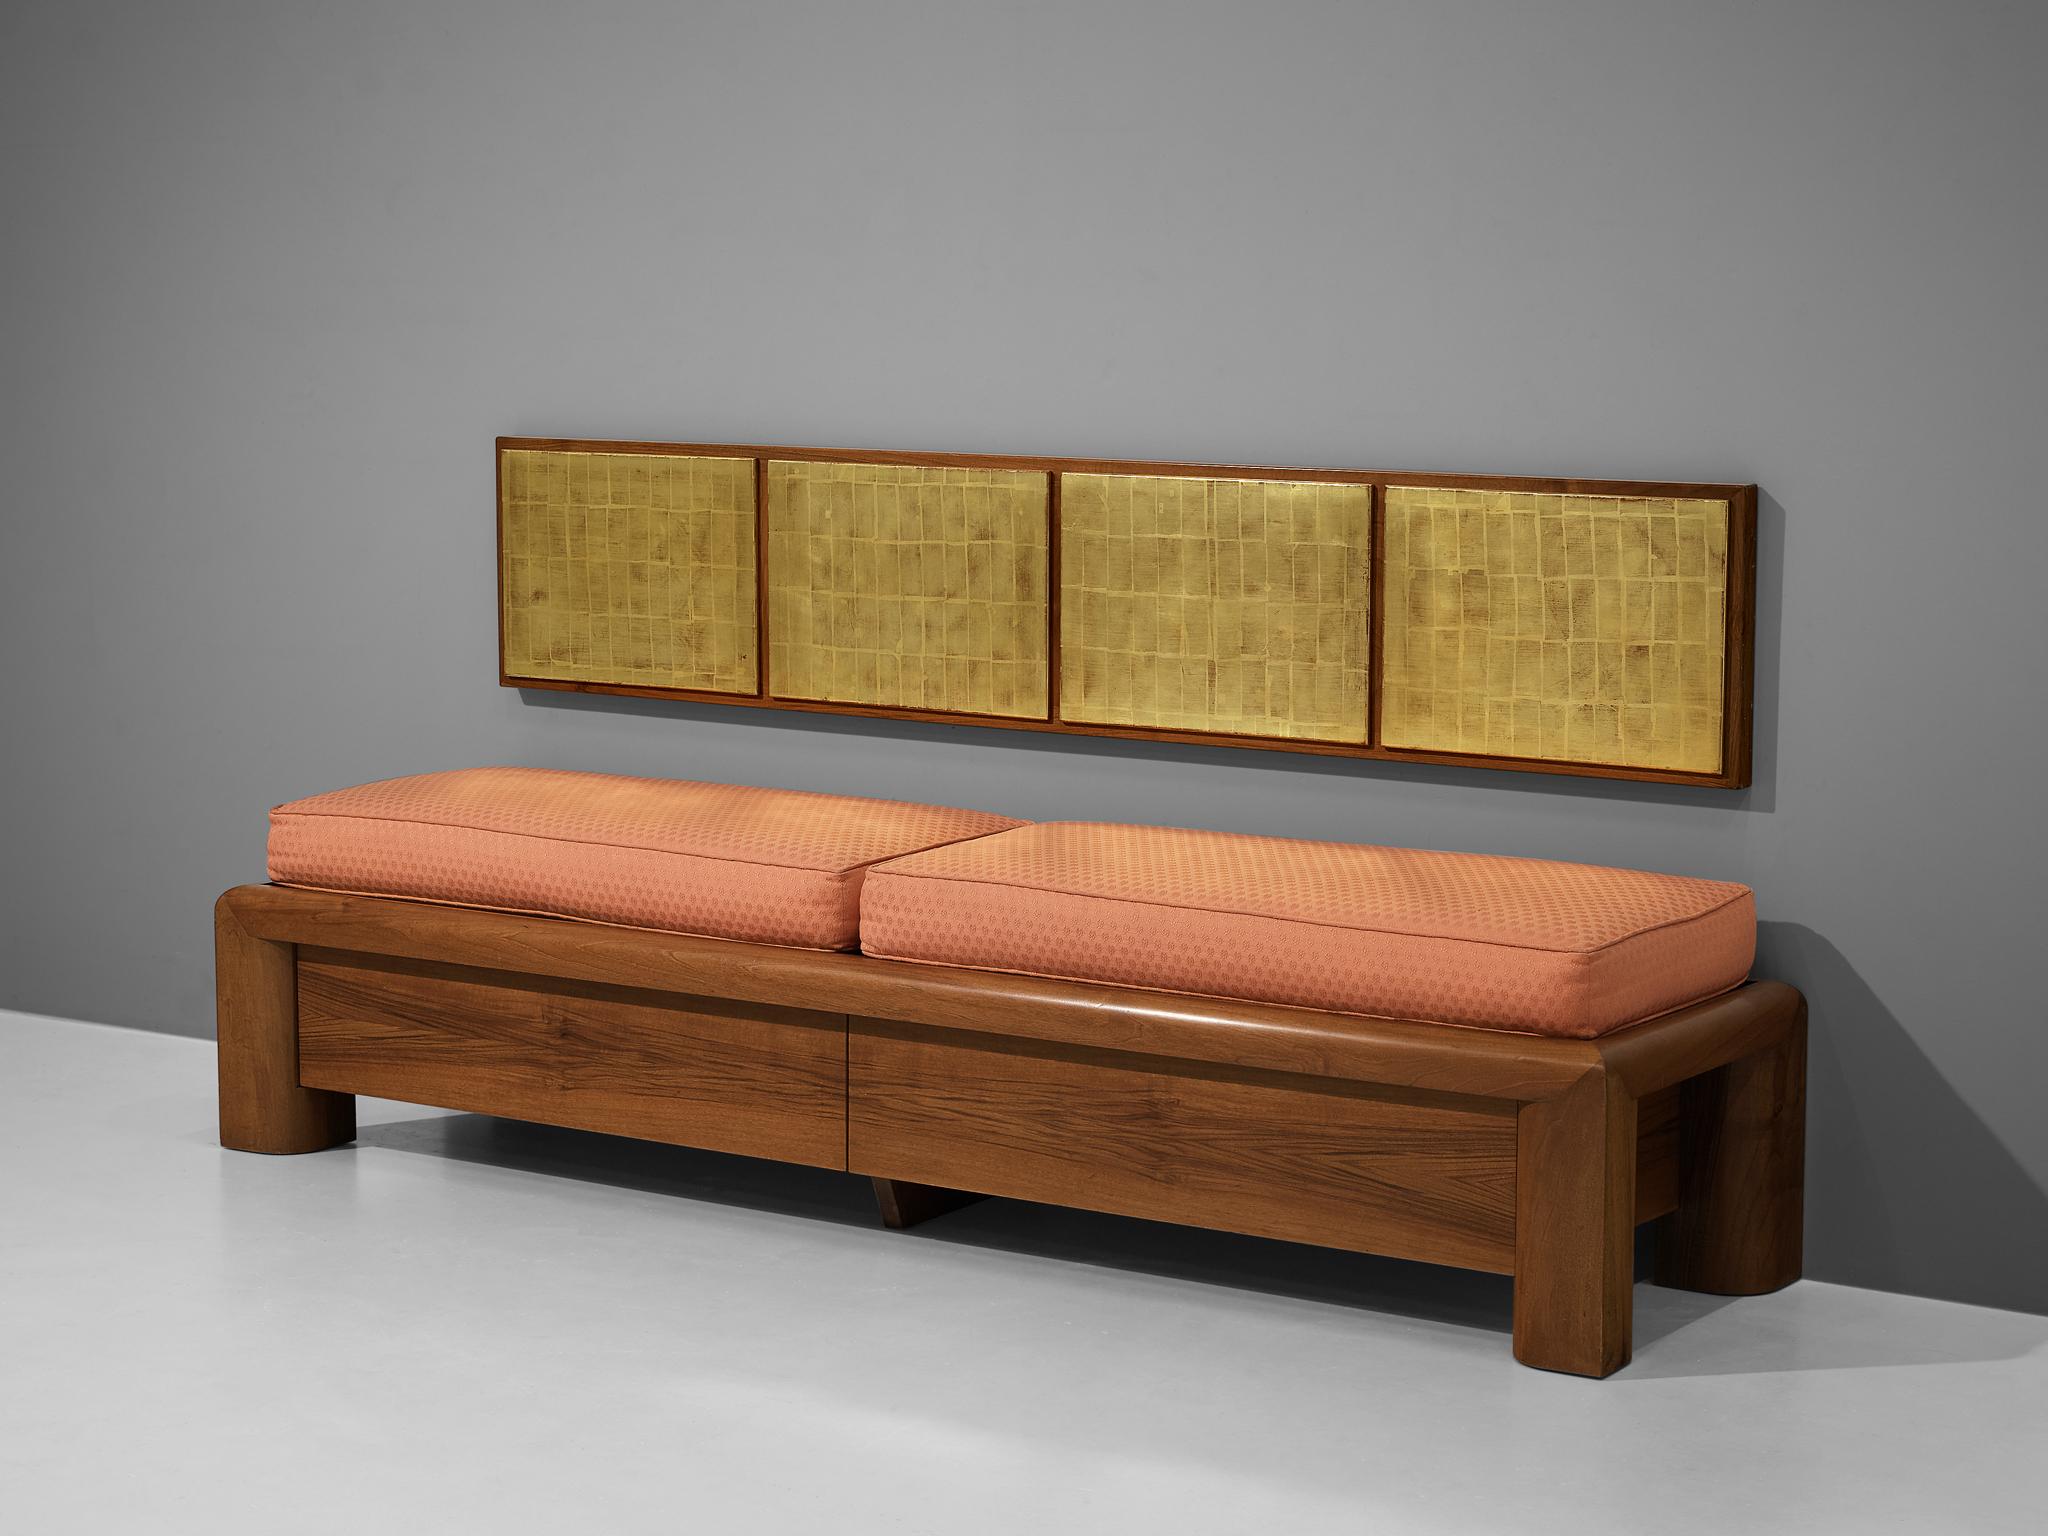 Cristiano Toraldo di Francia and Andrea Noferi, bench with drawers and wall panel, walnut, gold leaf, fabric upholstery, Italy, 1986

Admirable set consisting of a bench with matching piece of wall art designed by Cristiano Toraldo di Francia and